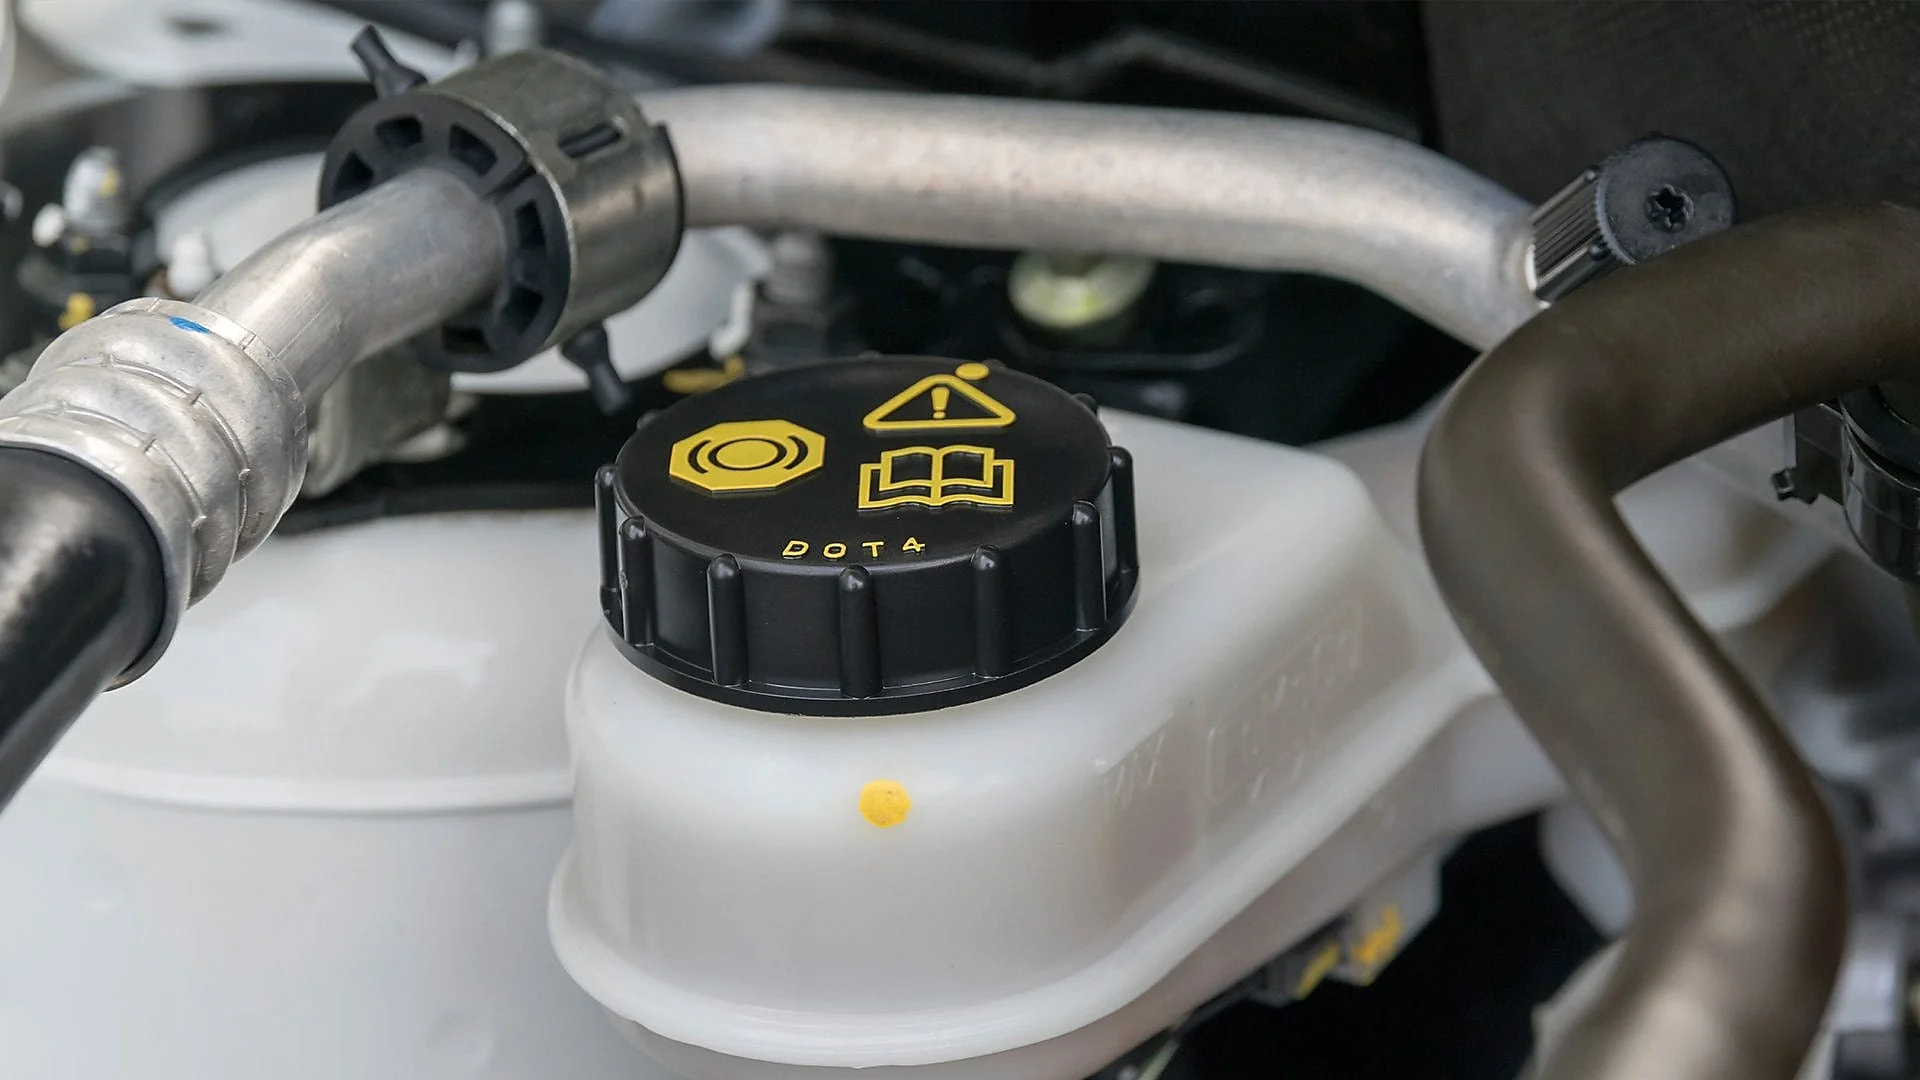 How Much Does It Cost To Change Brake Fluid?